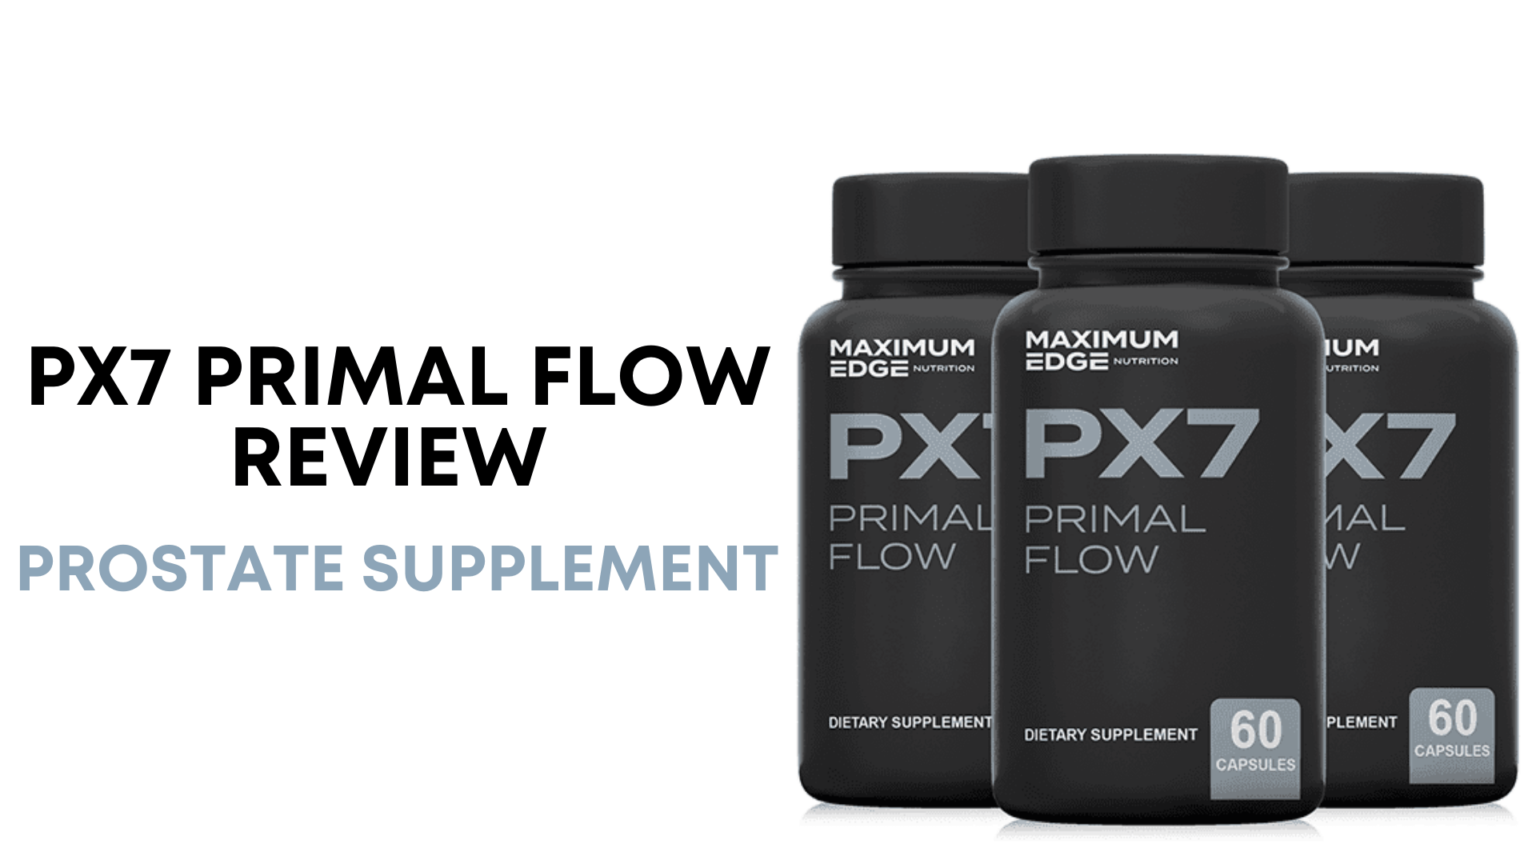 PX7 Primal Flow Reviews – Top Prostate Supplement 2022